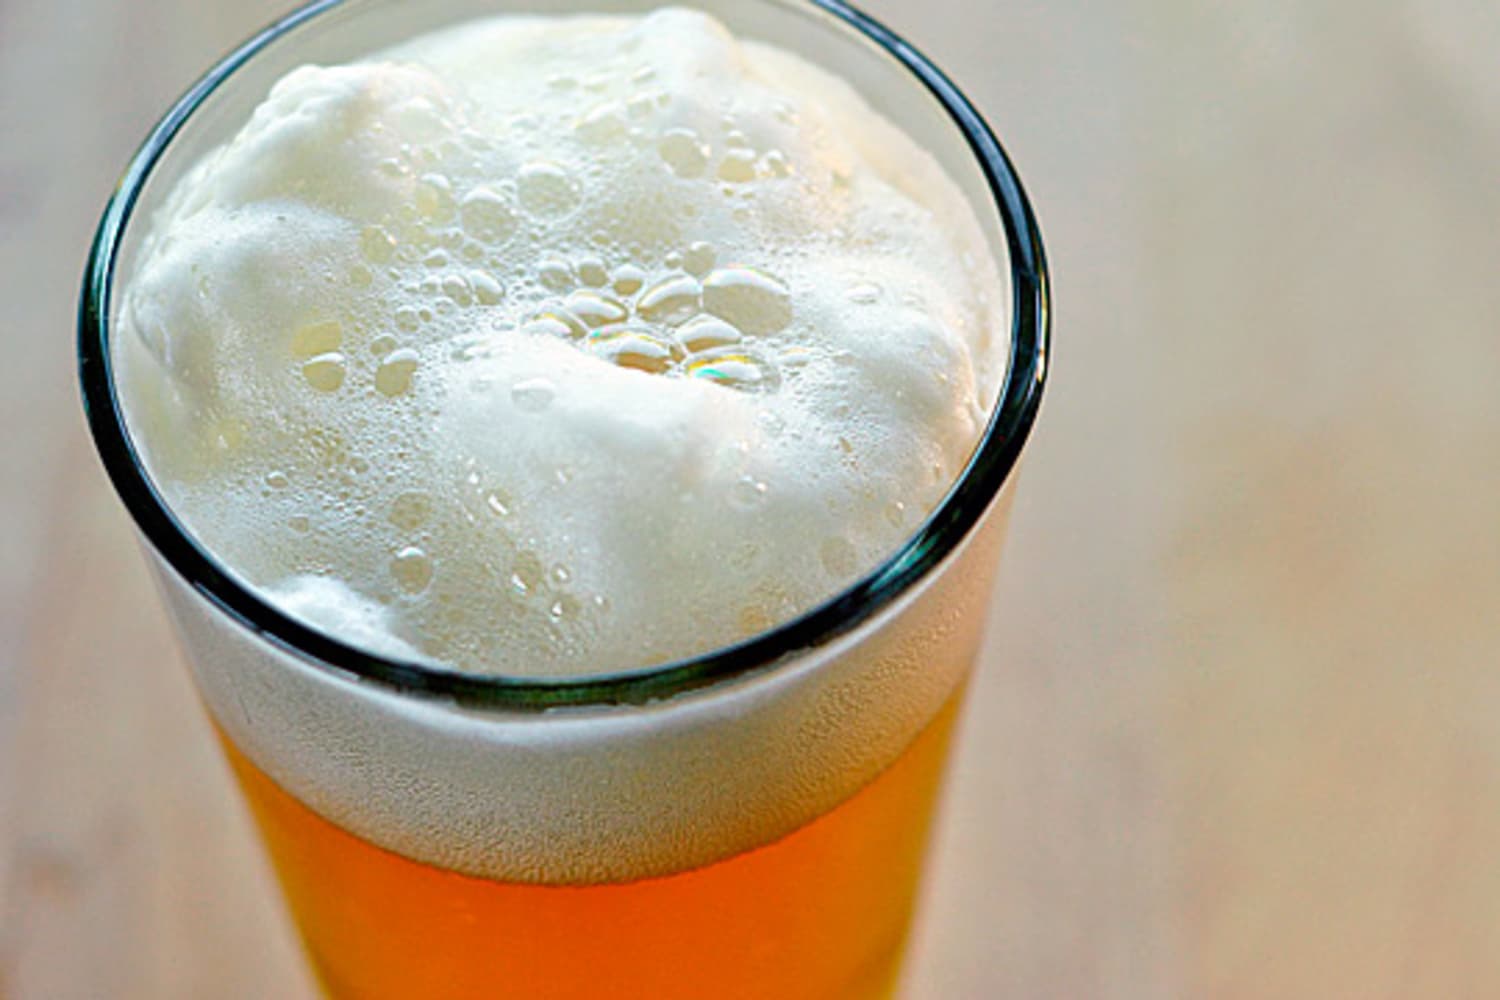 Beer and Glassware: Does it Matter?